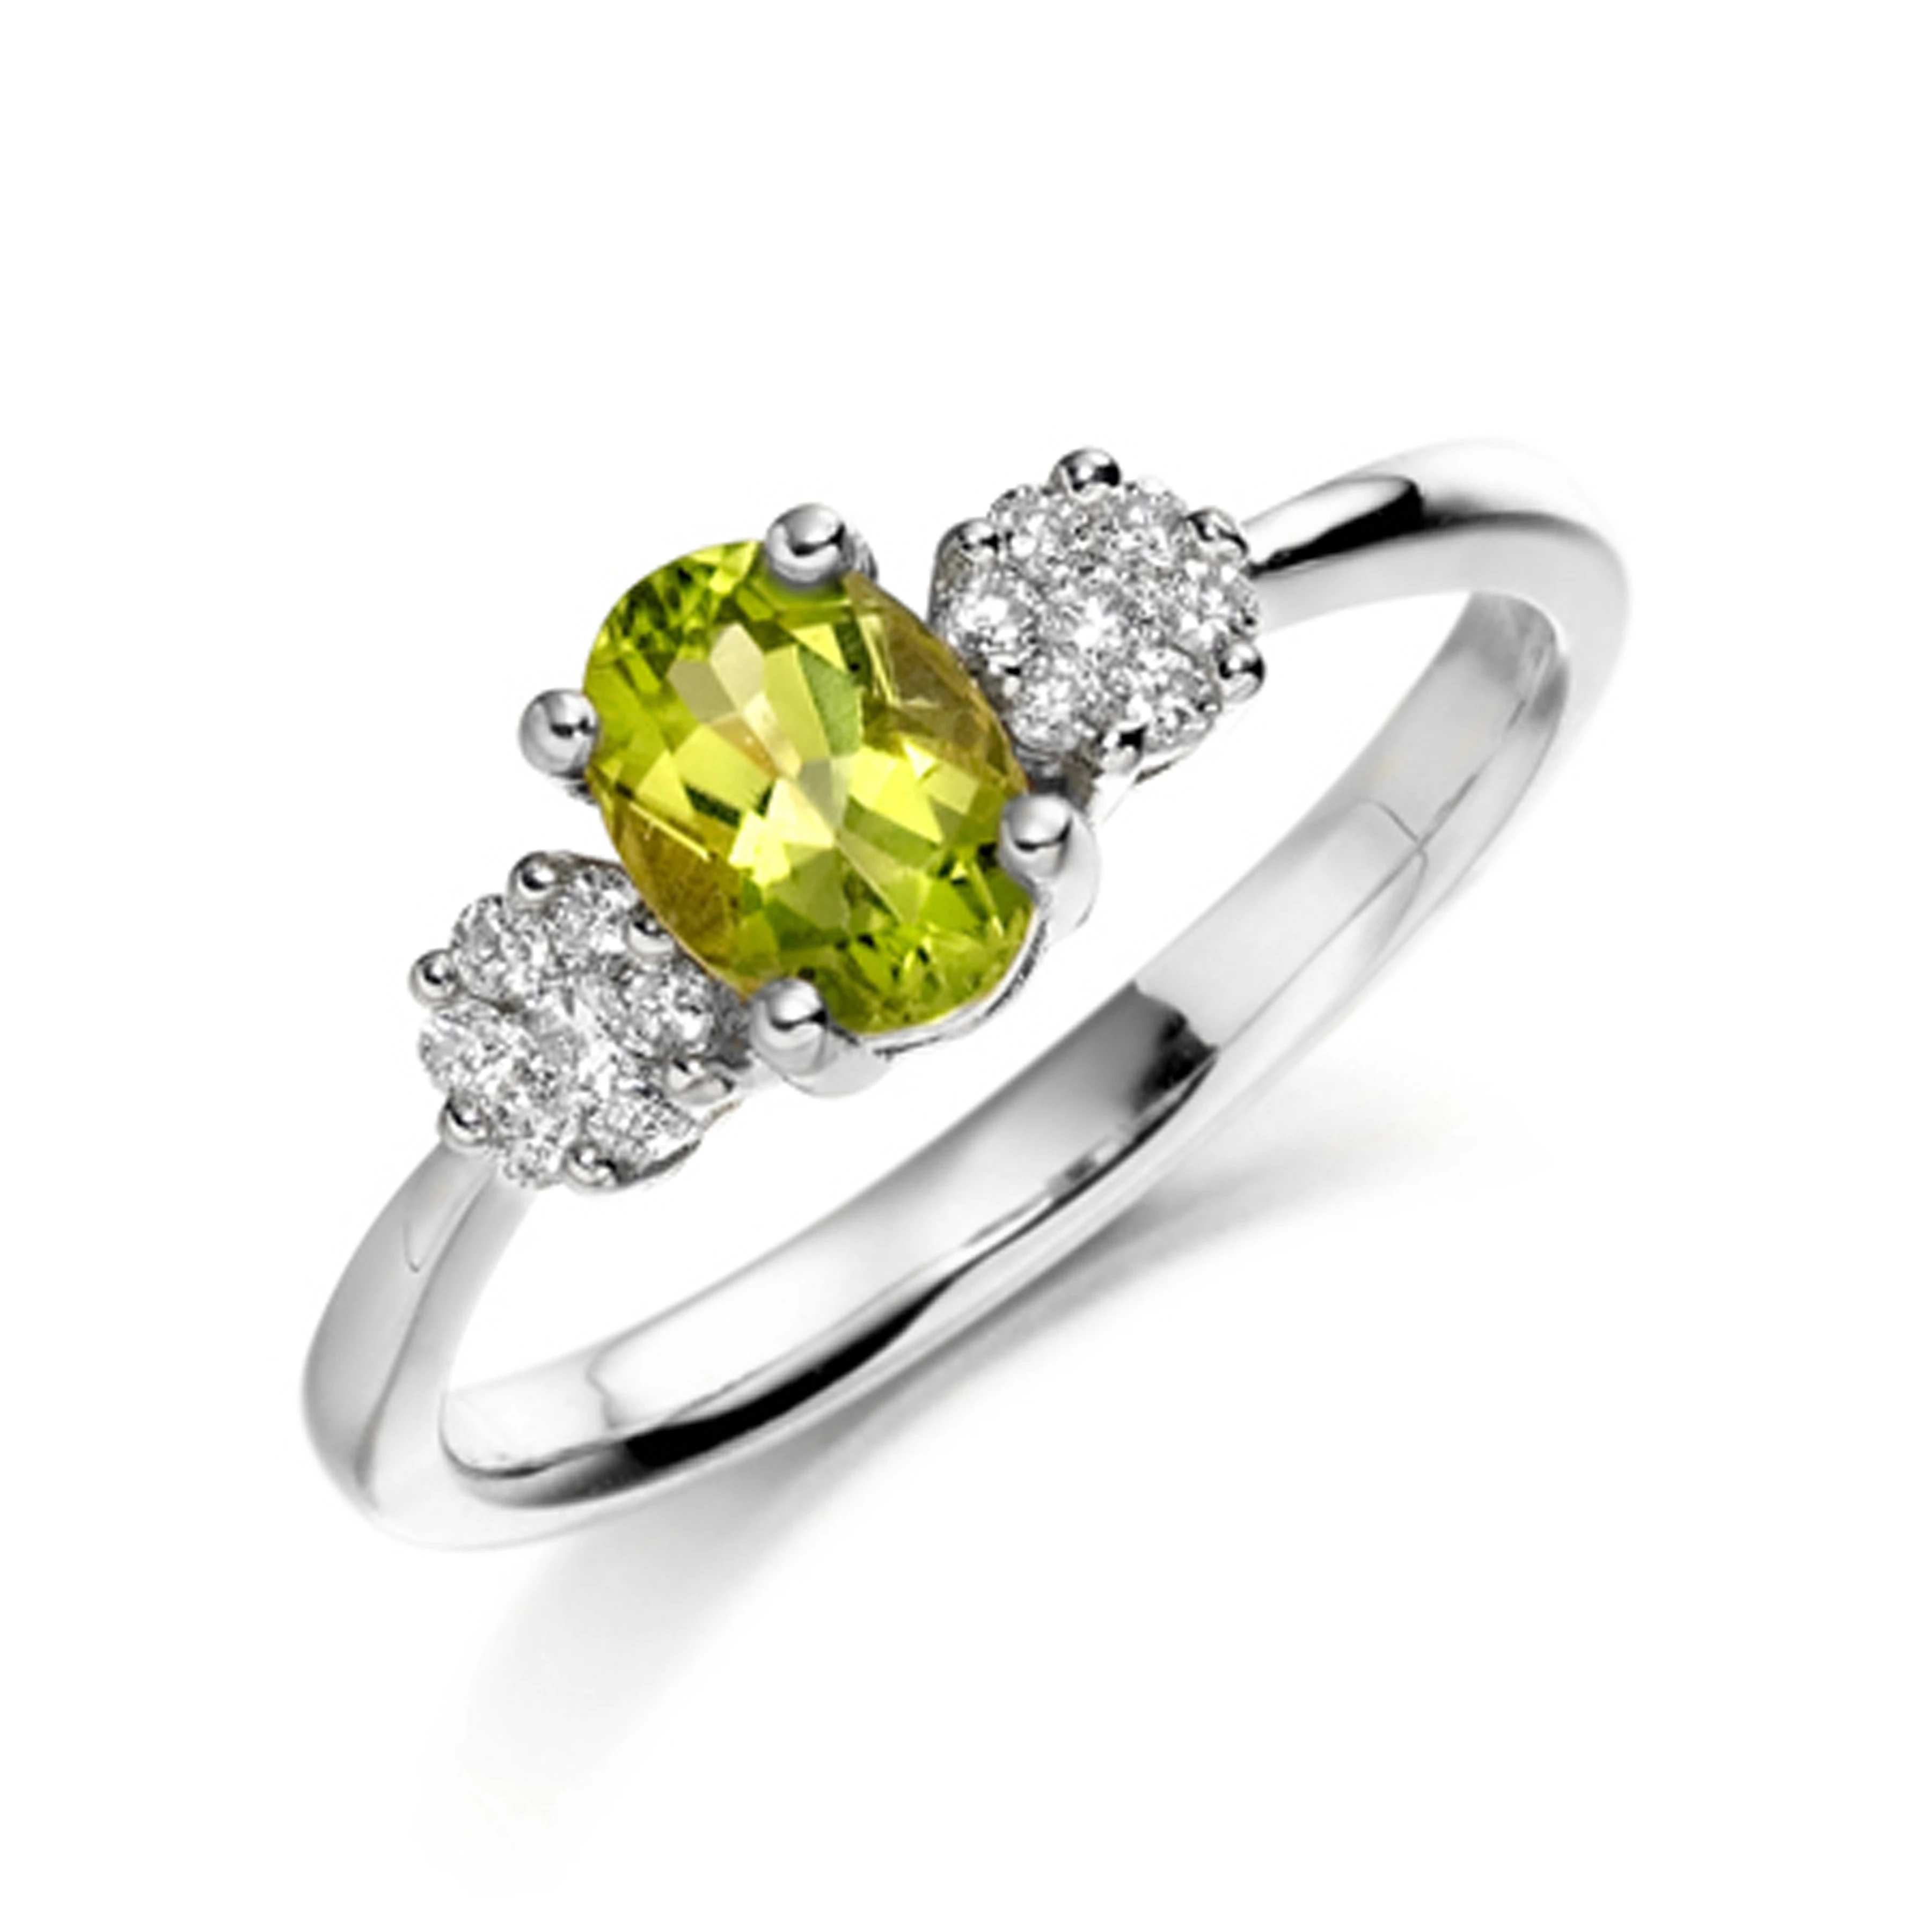 7X5mm Oval Peridot Stones On Shoulder Diamond And Gemstone Engagement Ring